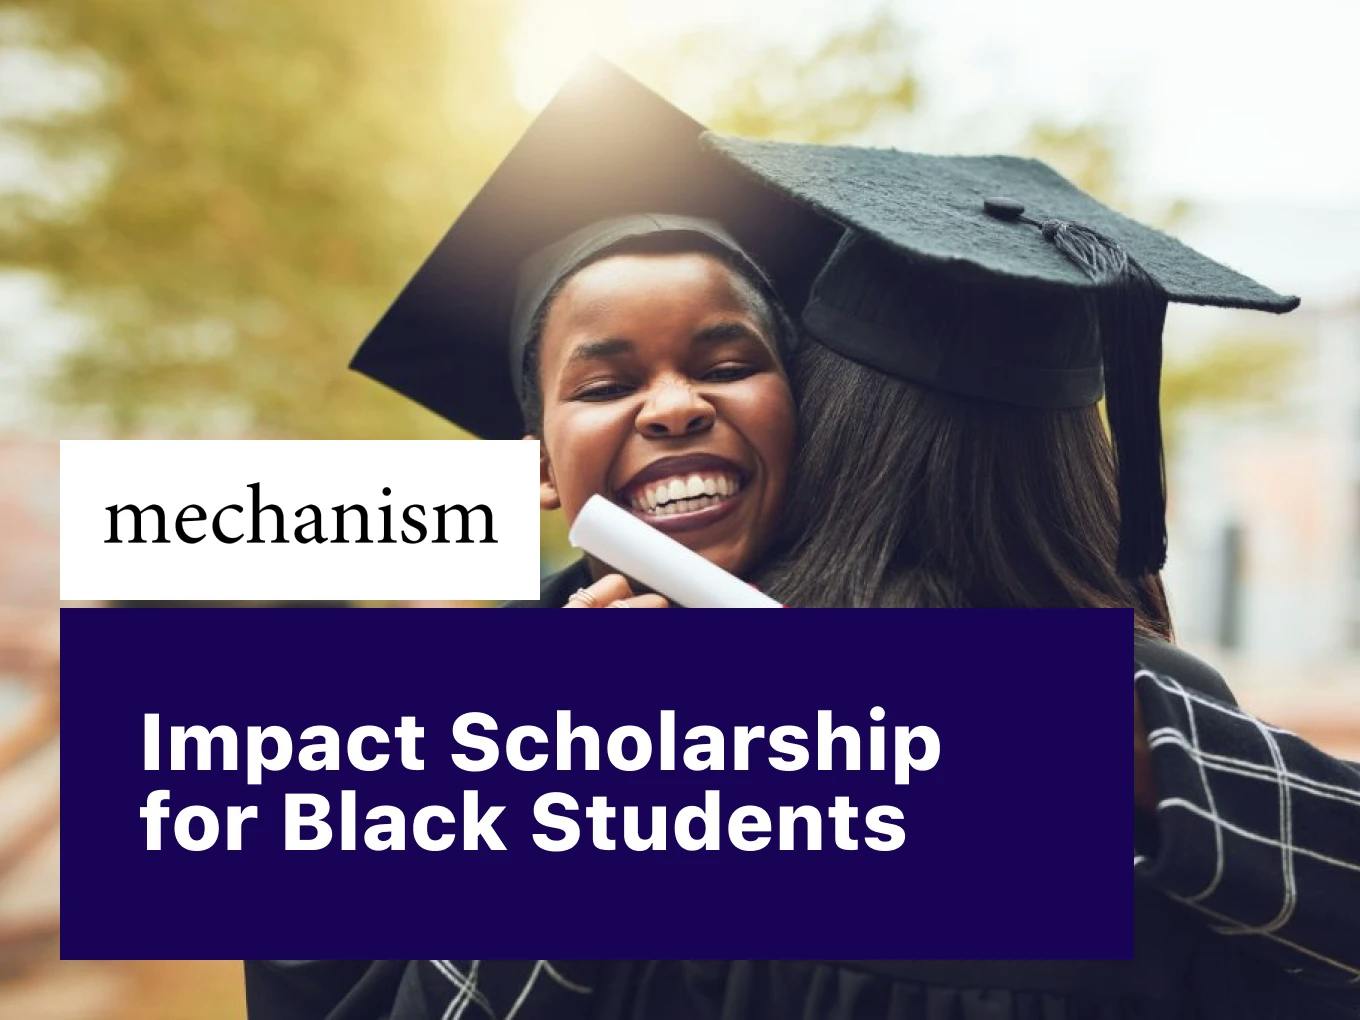 Impact Scholarship for Black Students